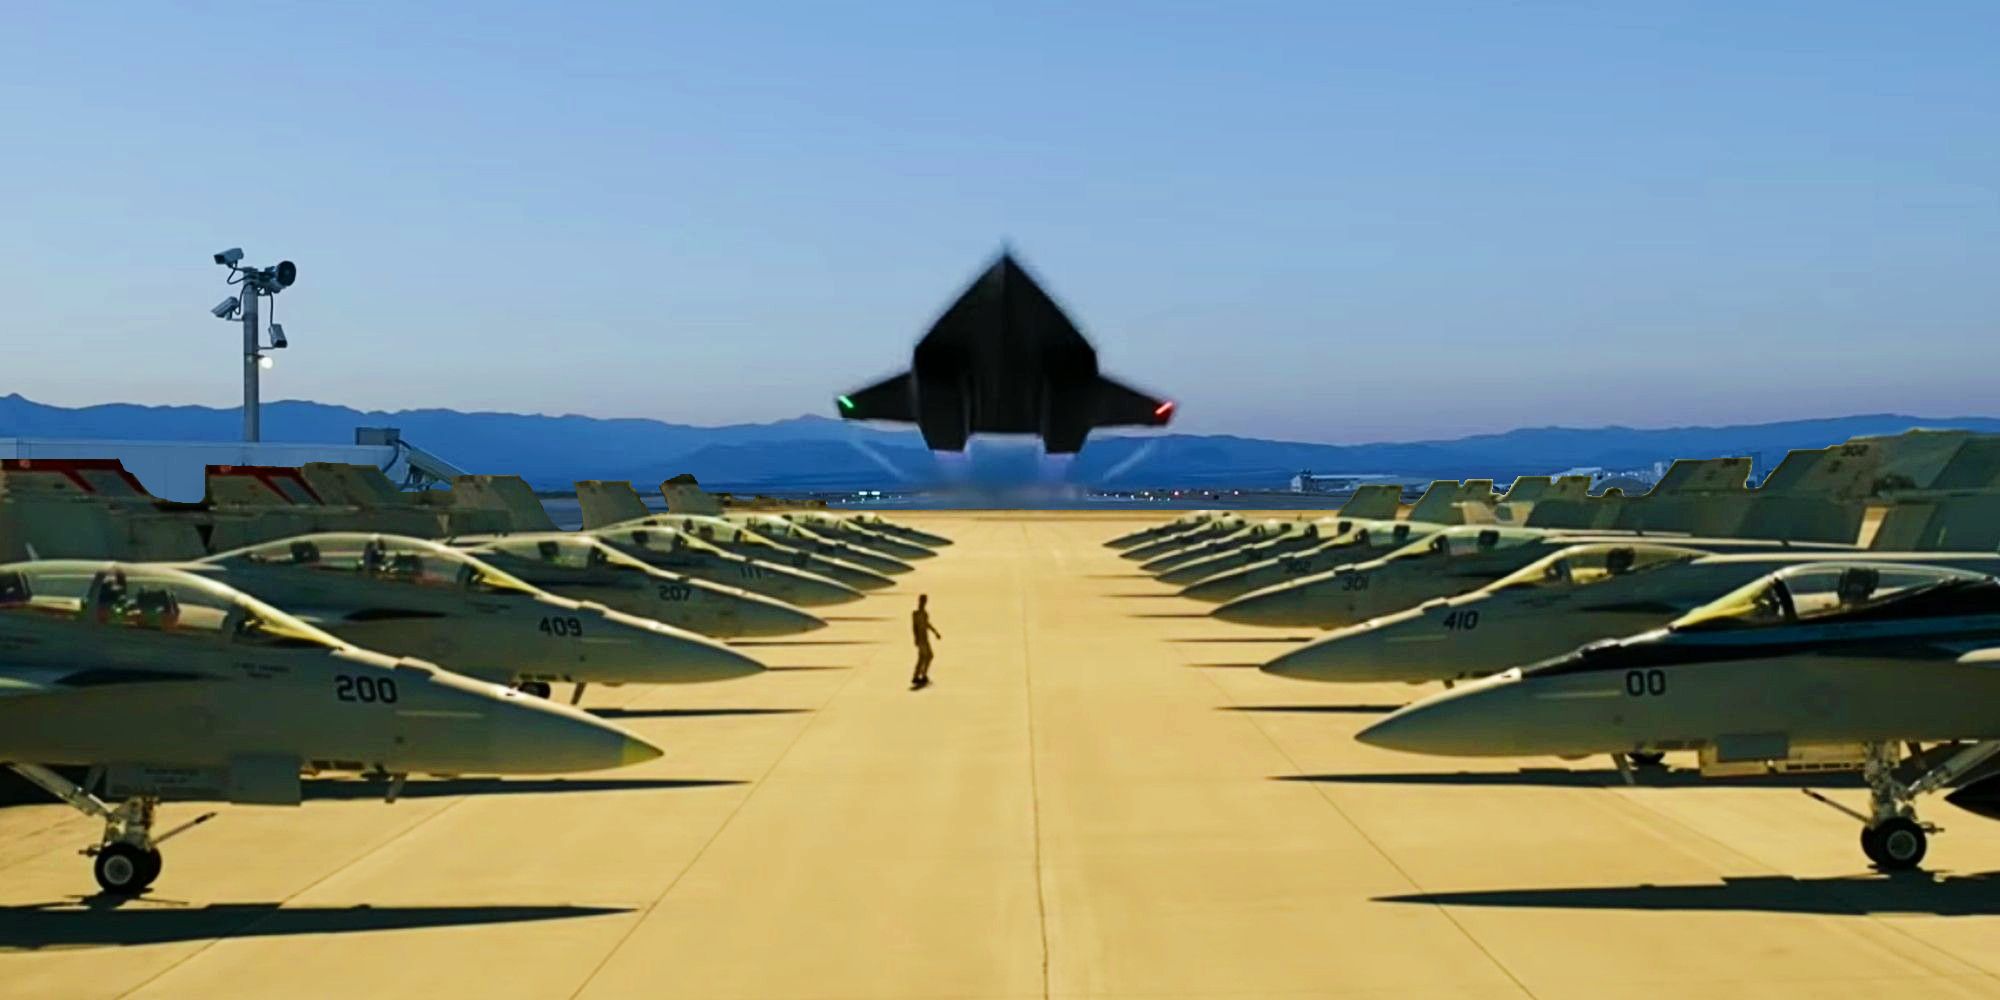 Every Type Of Fighter Jet Used In The Top Gun Movies